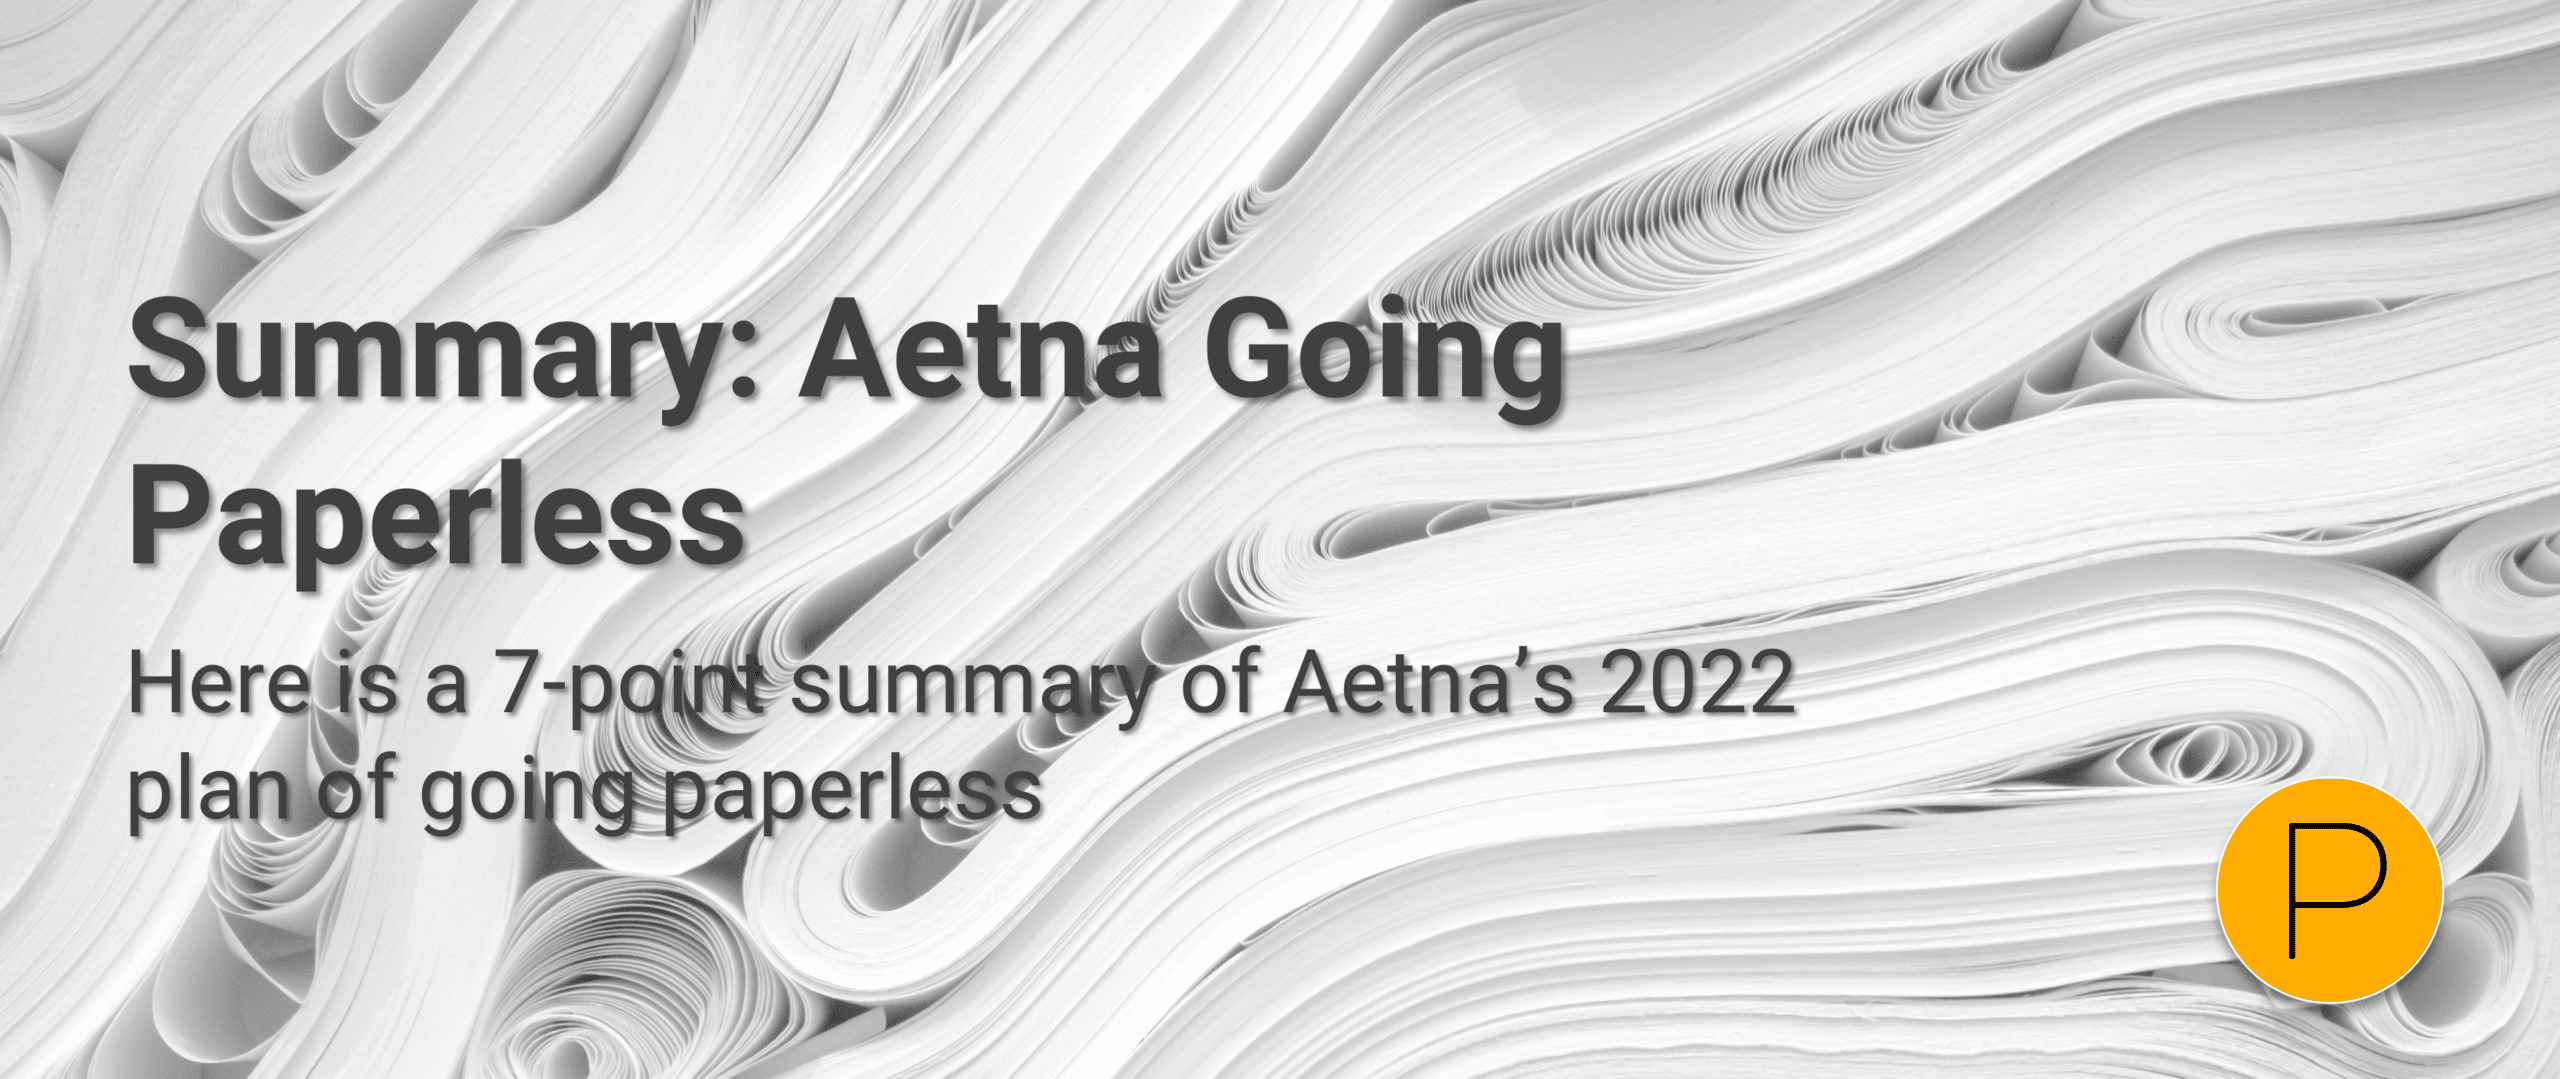 Aetna Going Paperless 7-Point Summary 2022